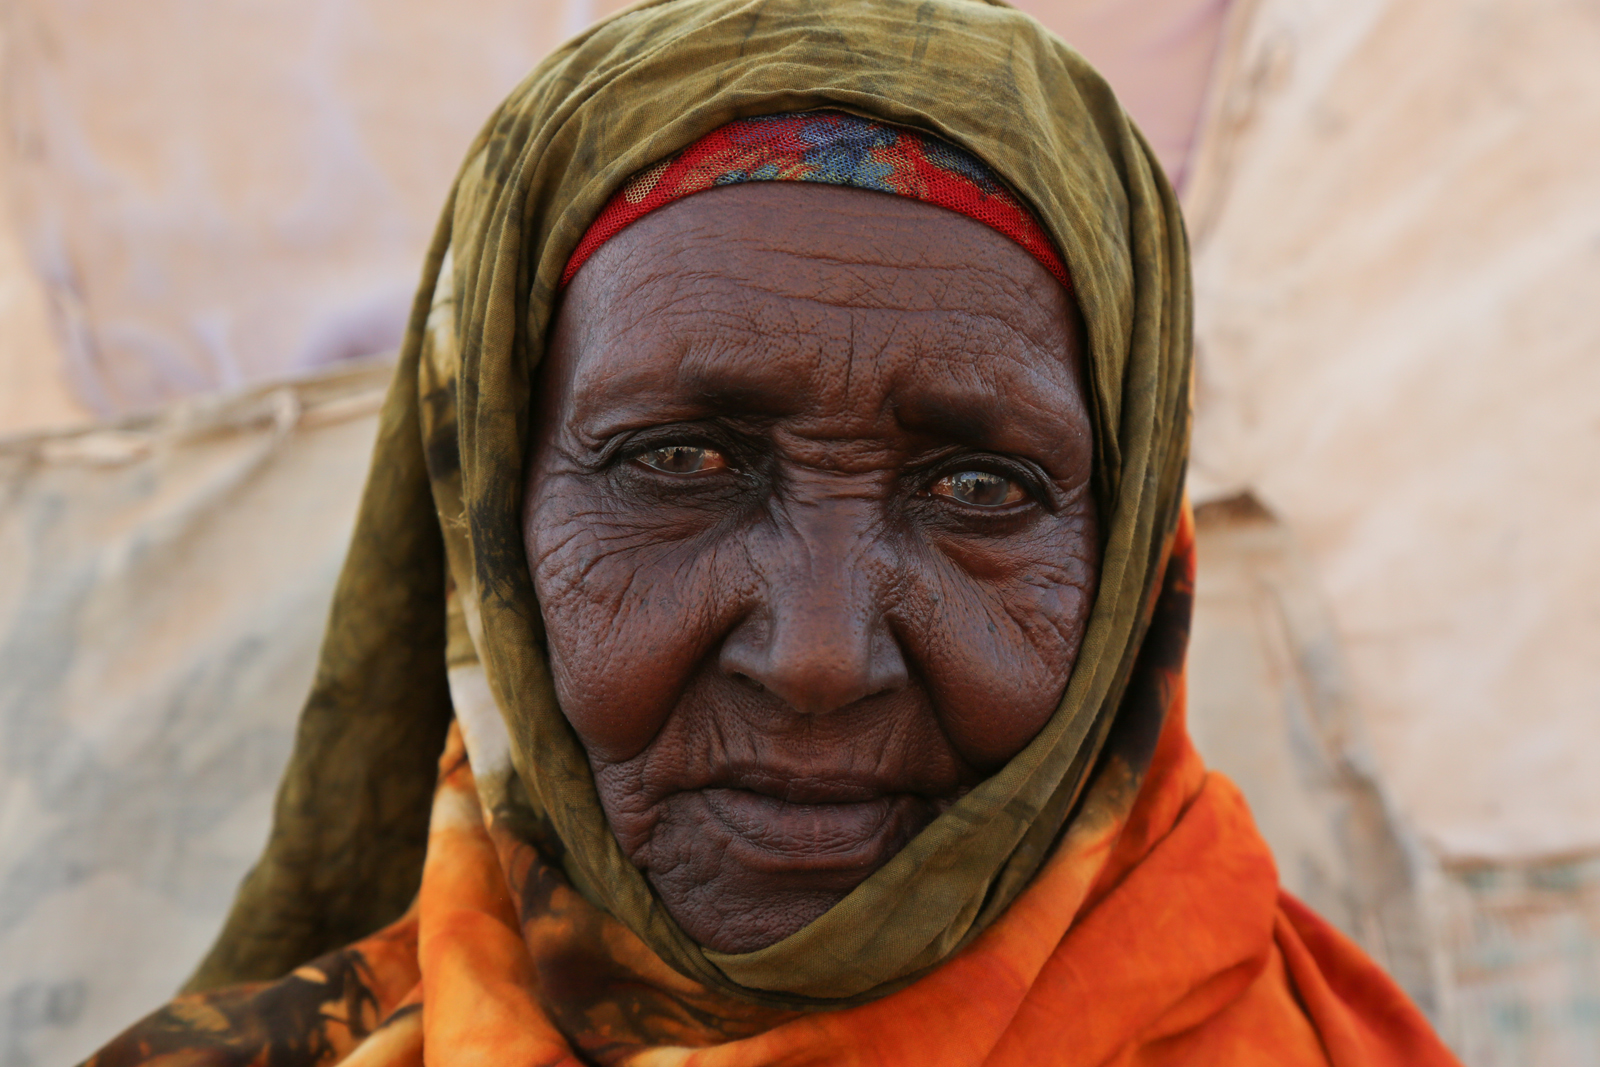 70-years-old Hodan Ciise Hashi, poses for a portrait in front of her house in Jigjiga Yar neighborhood in Hargeisa city. This was during the National Immunization Camping in Hargeisa, Somaliland on 28 March 2019. WHO Photo